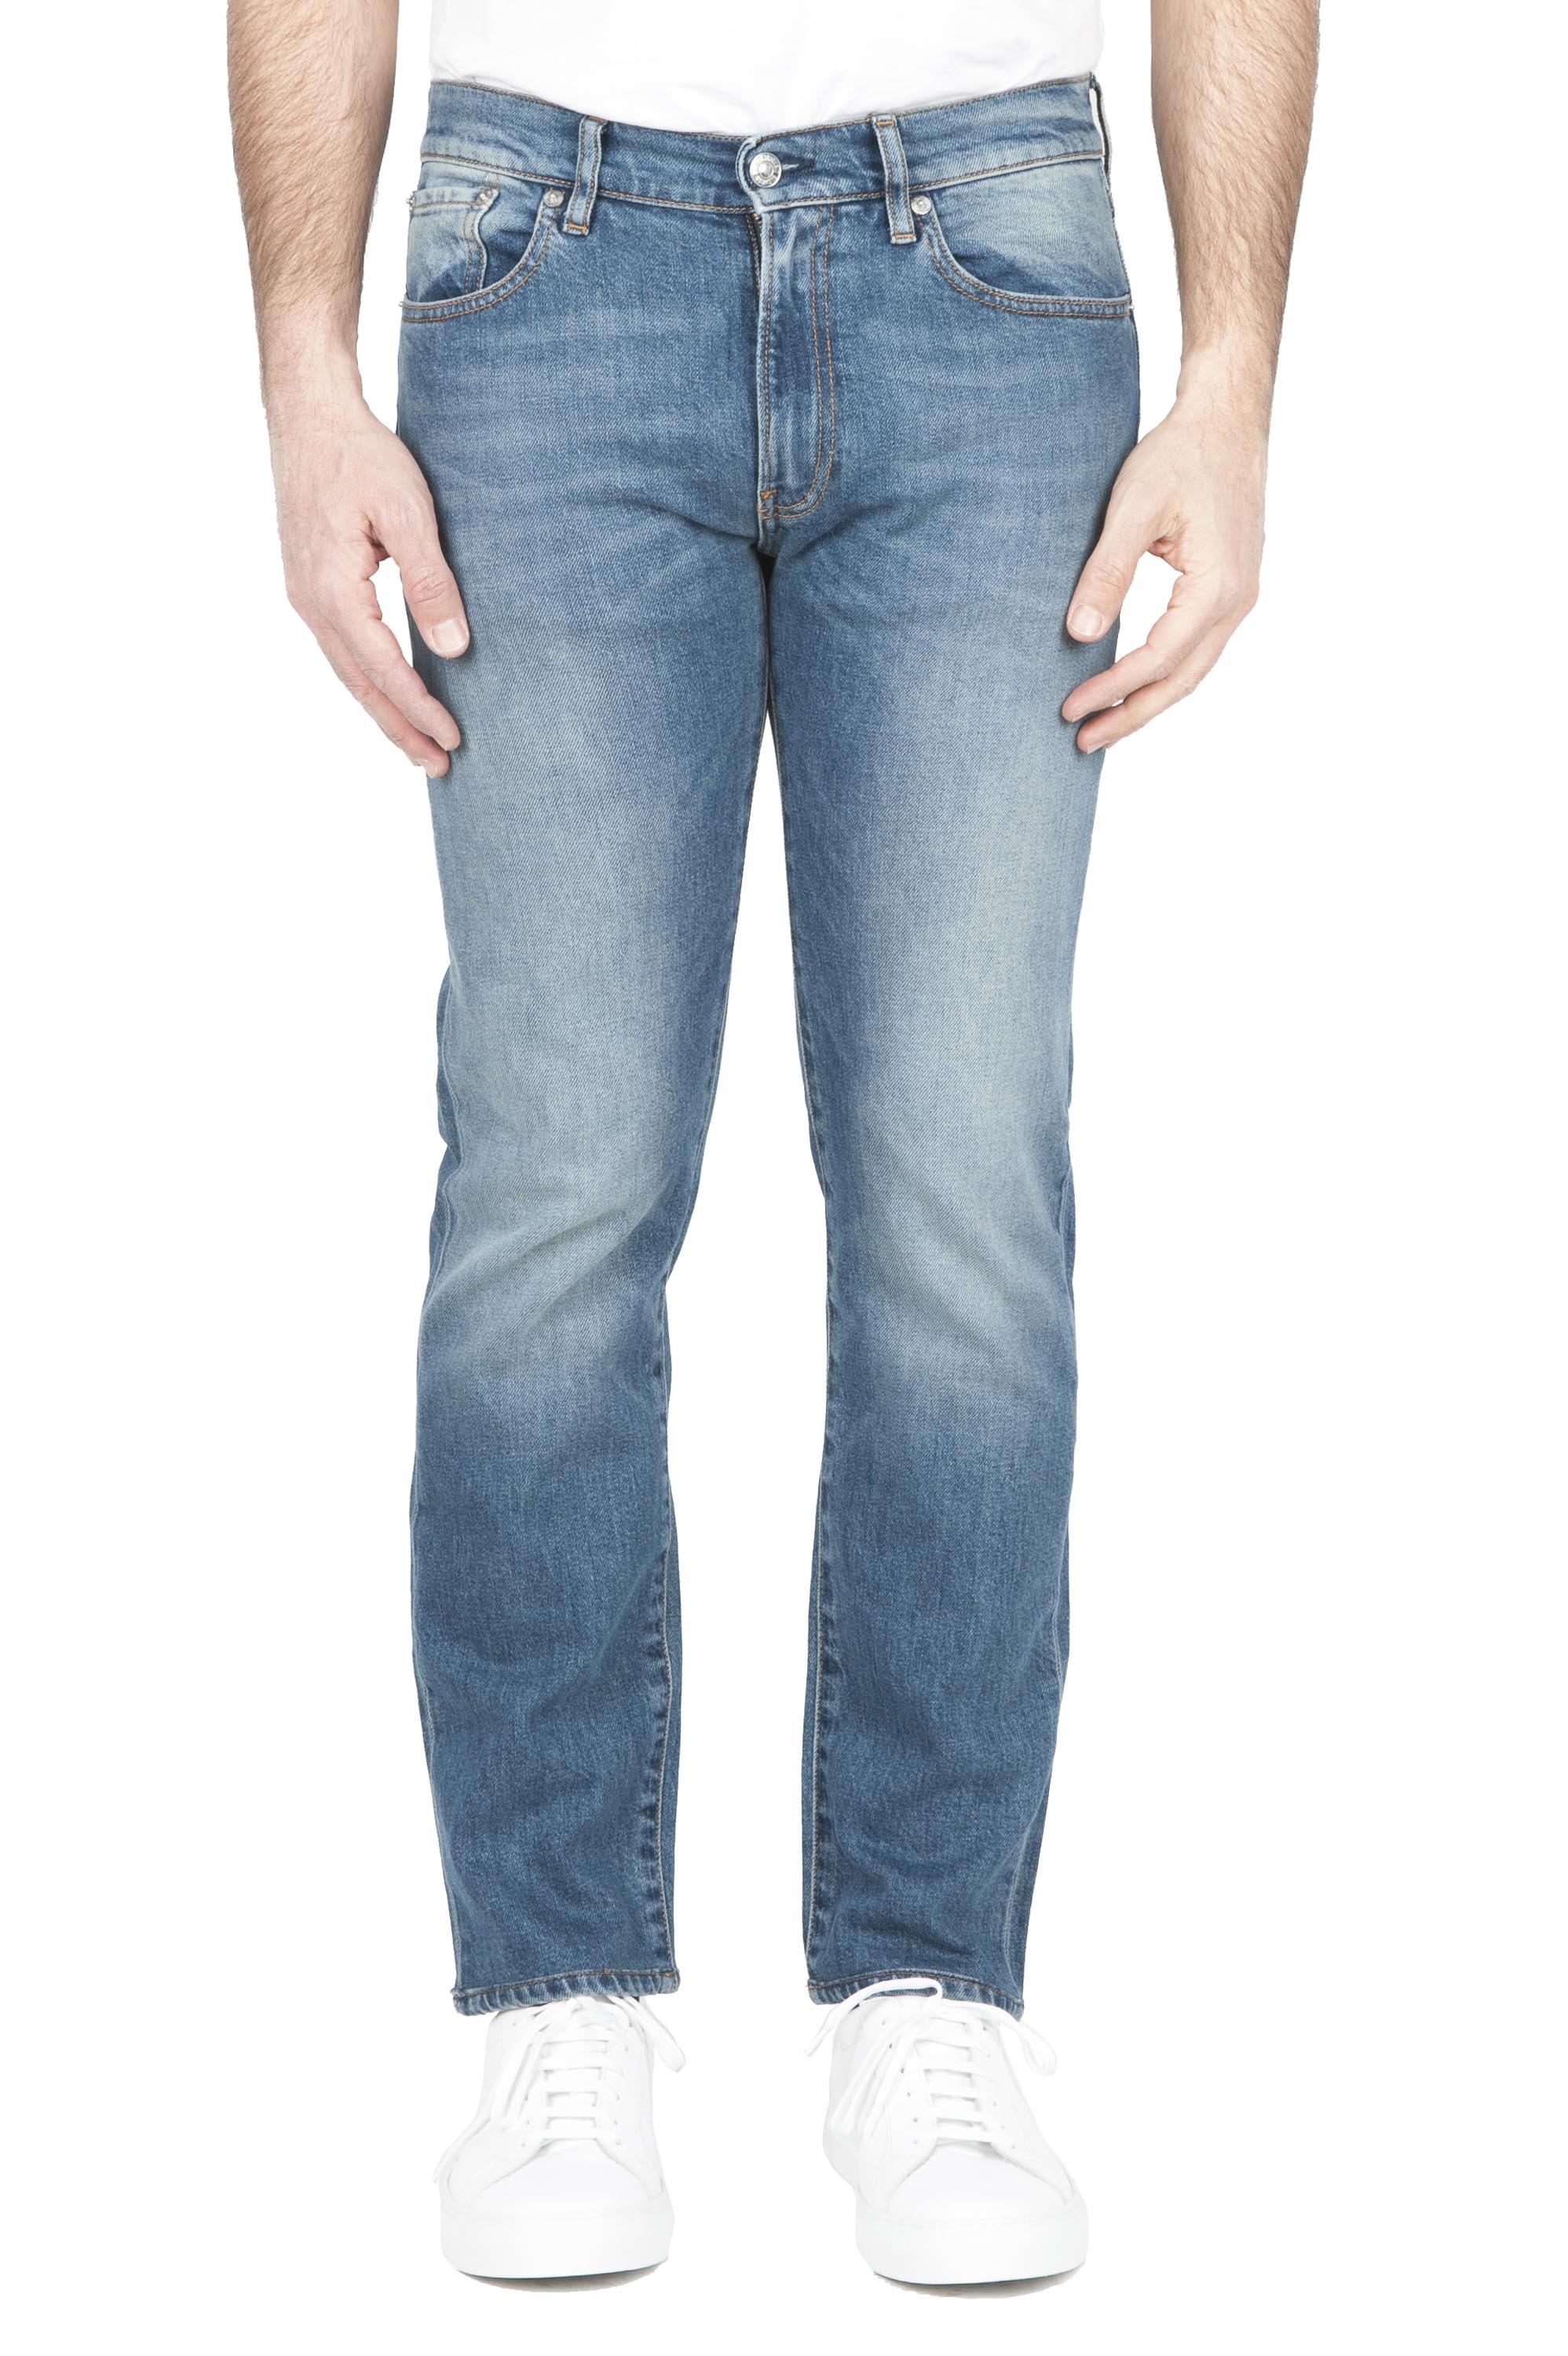 SBU 01450_2020SS Pure indigo dyed stone bleached stretch cotton blue jeans 01